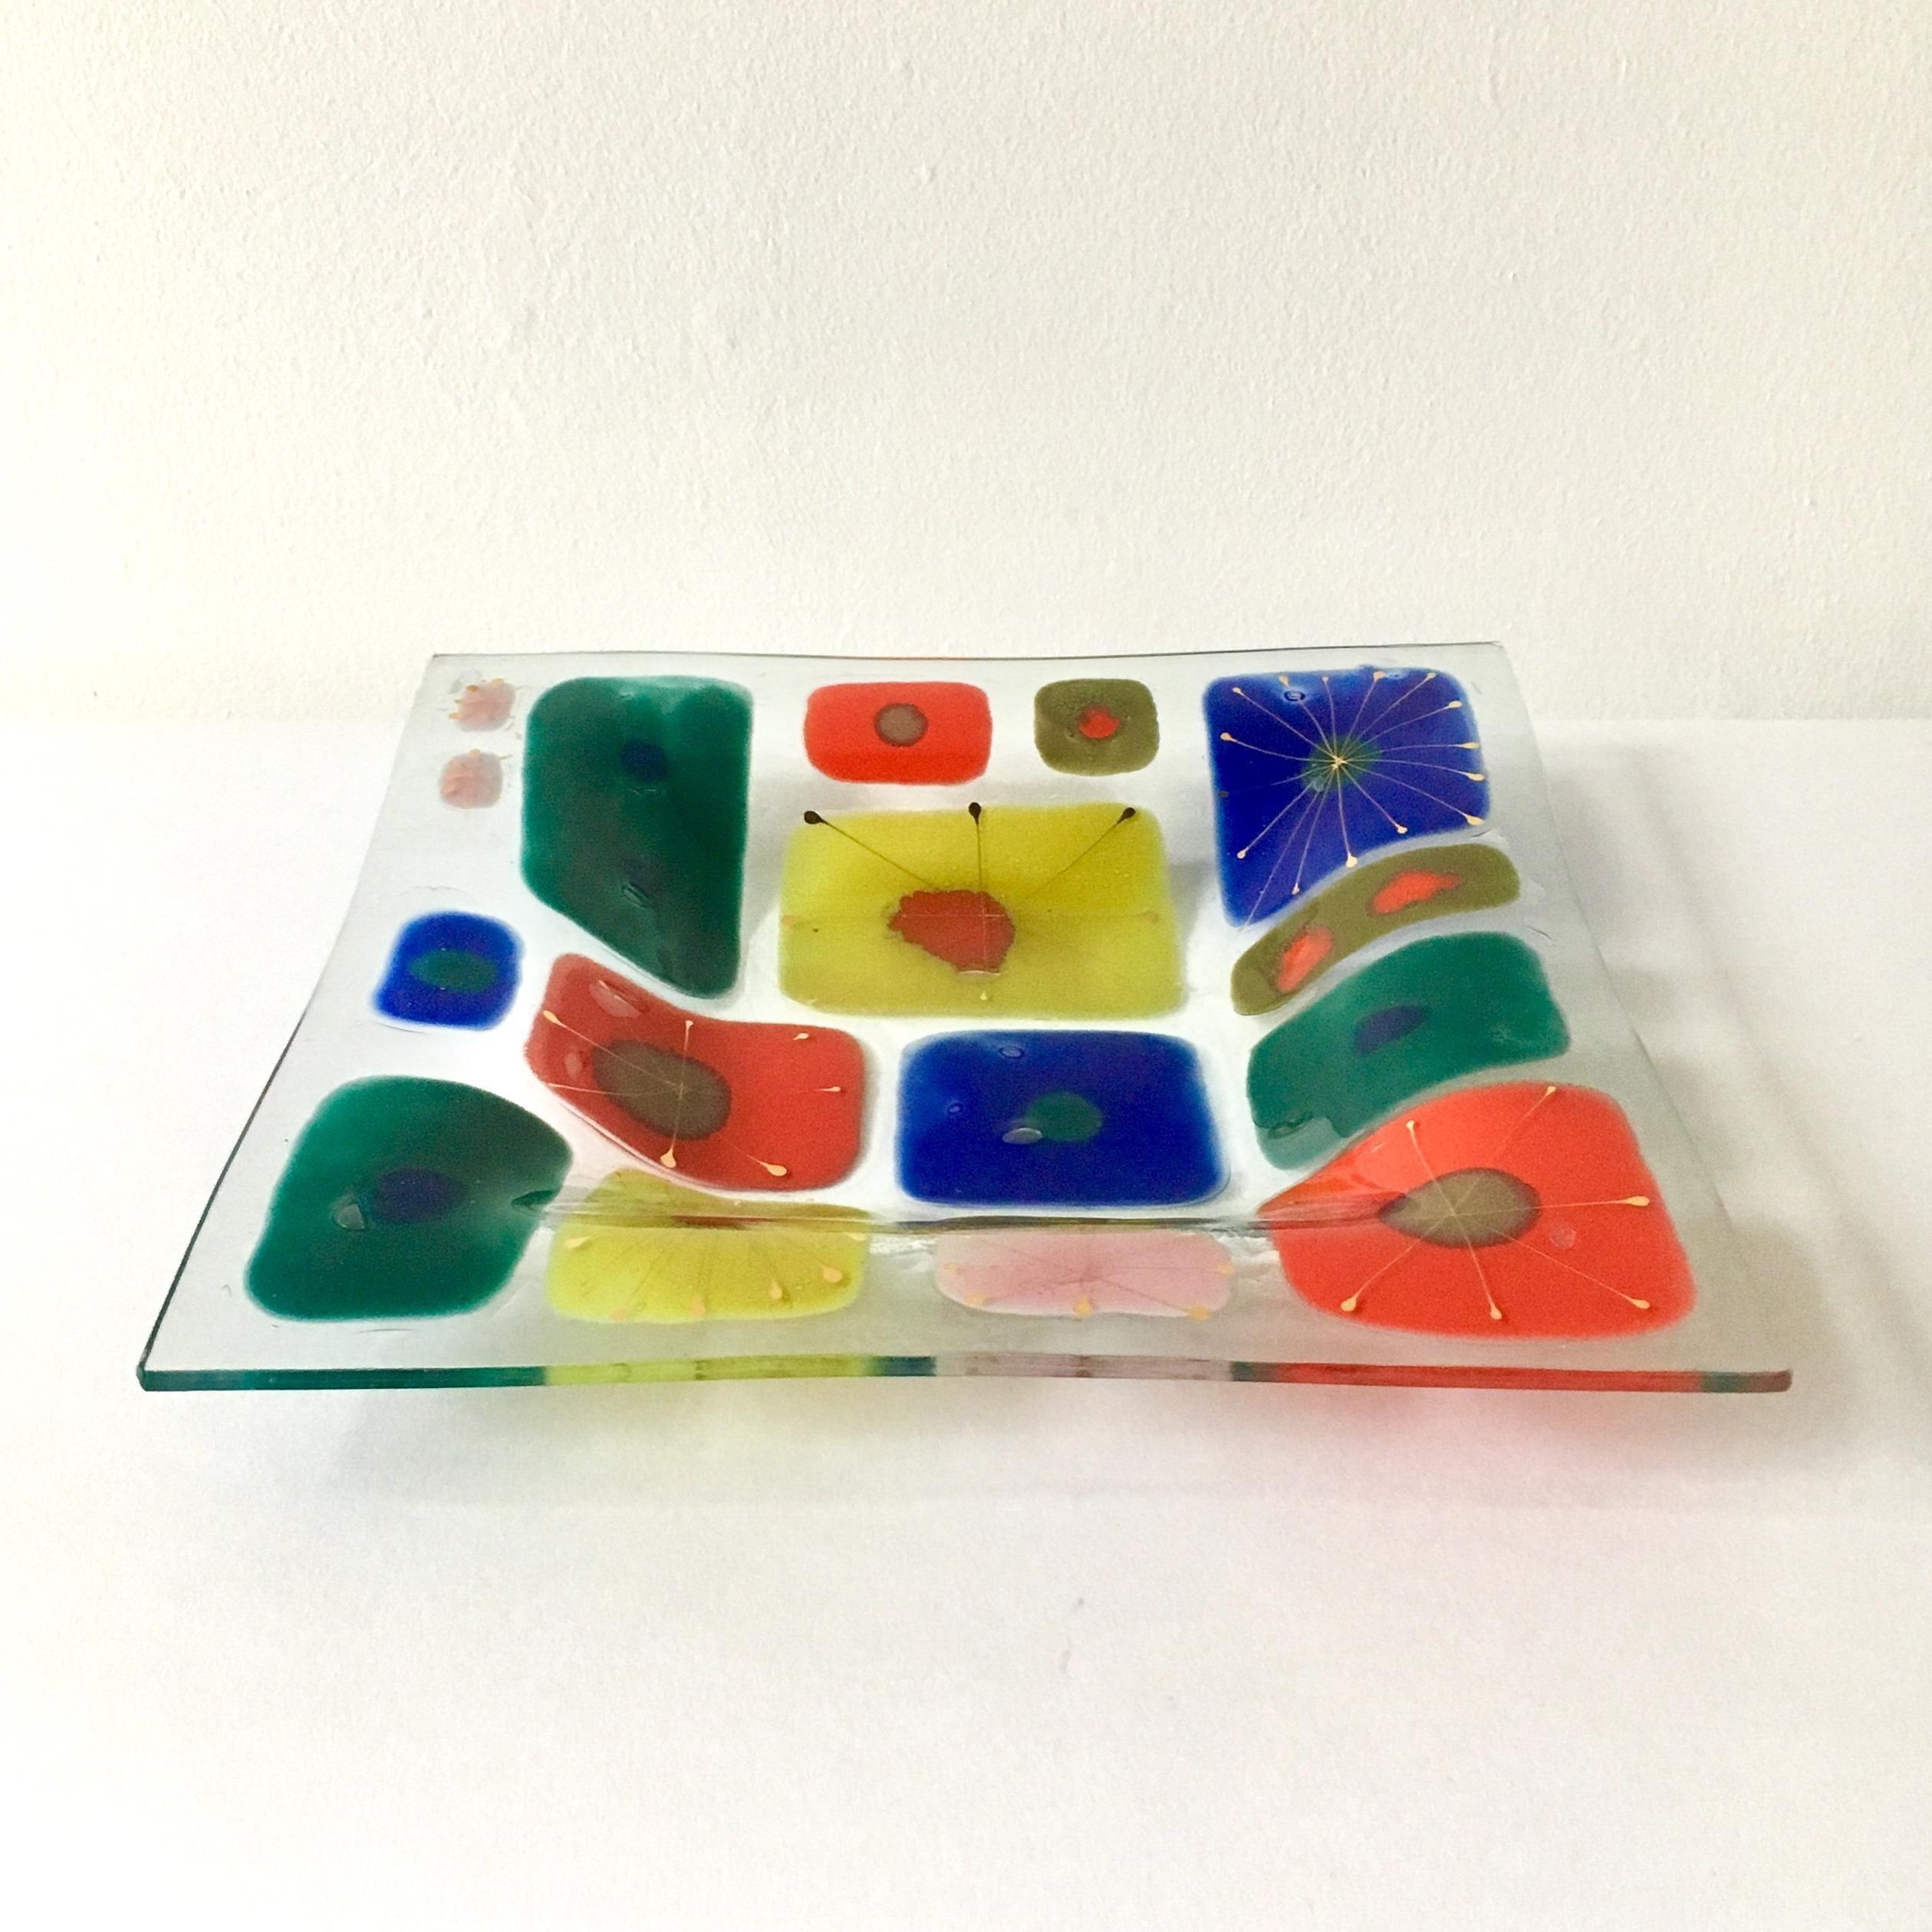 A large wells street studio coral fused art glass plate designed by Michael and Frances Higgins etched signature and dancing man 1951-1957.

Michael Higgins (1908-1999) and Frances Higgins(1912-2004) met in Chicago and were married in 1948. They